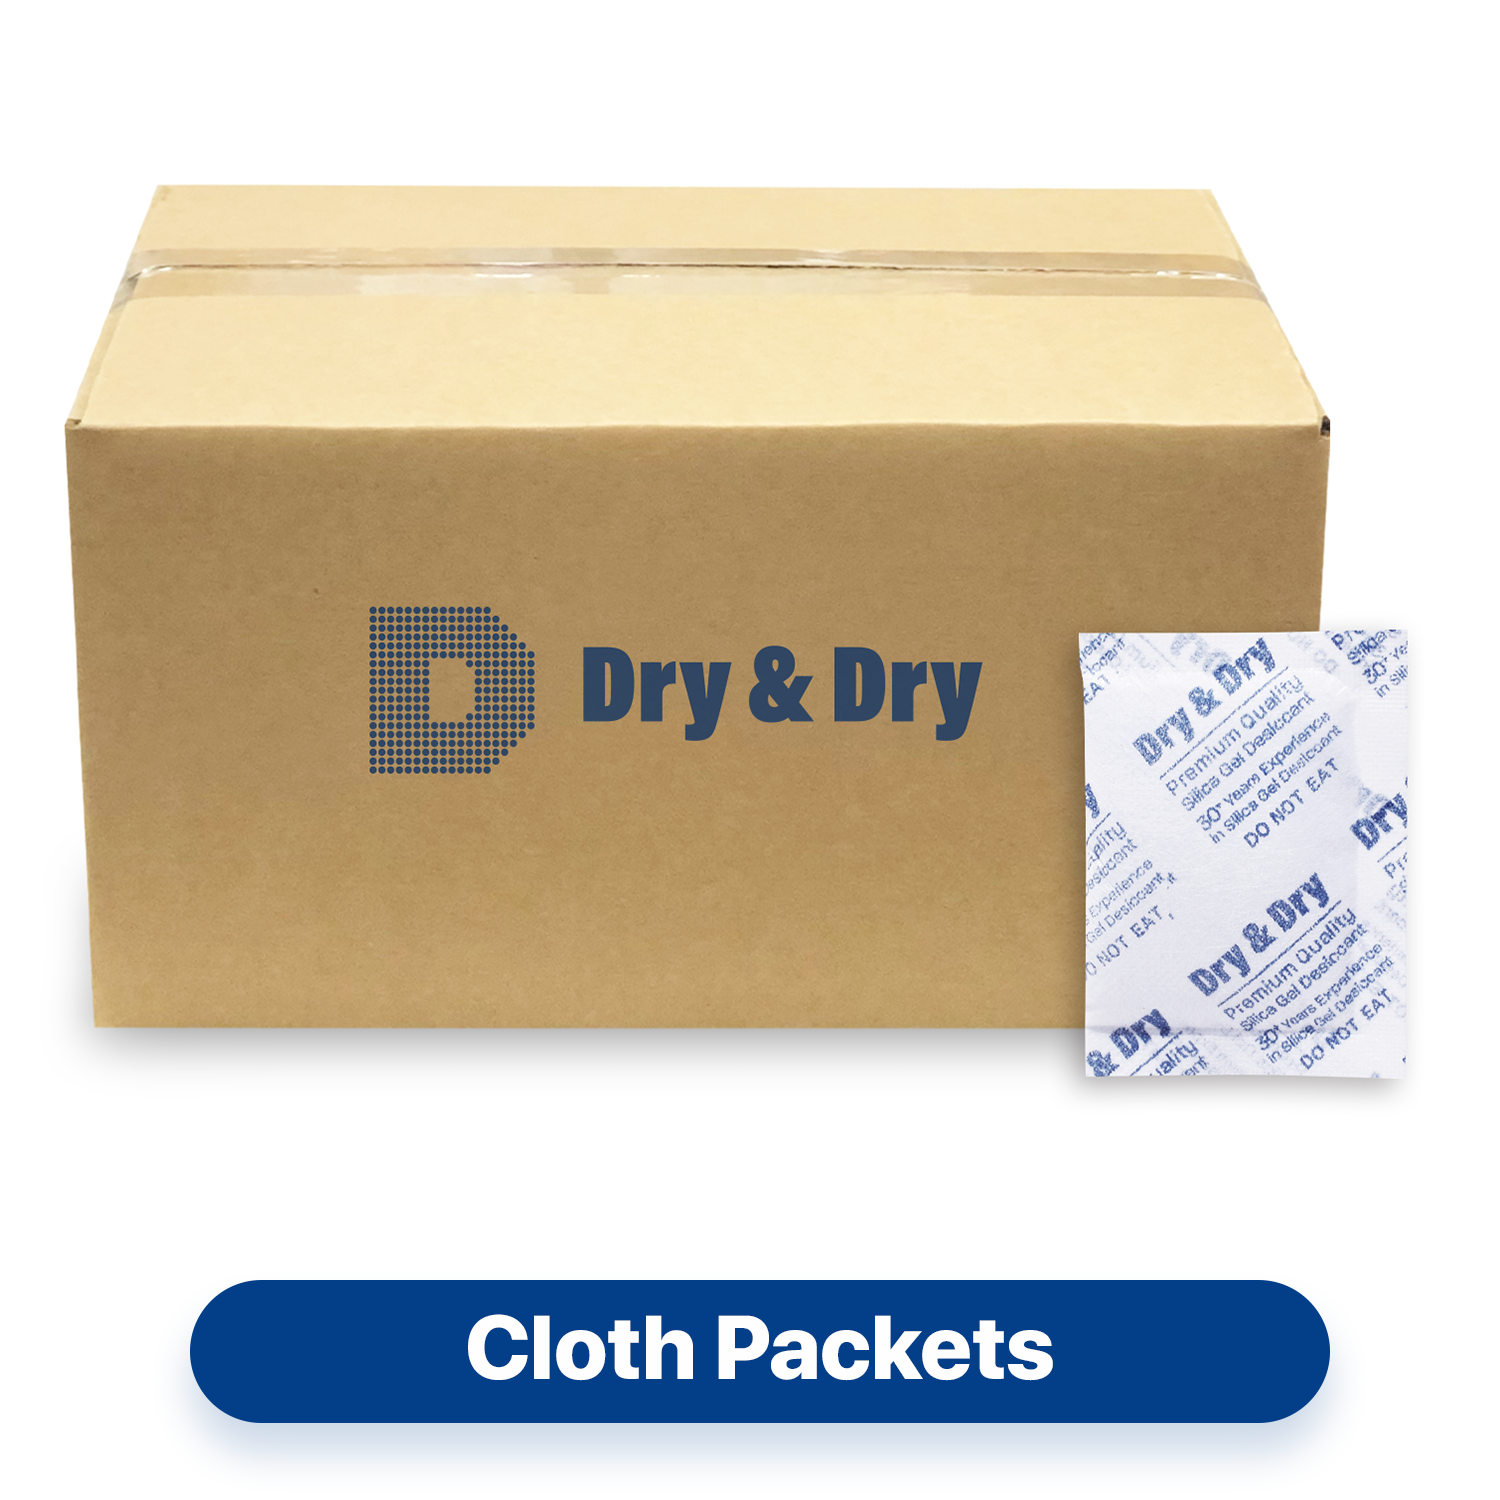 10 Gram [1500 Packets]  "Dry & Dry" Premium Silica Gel Desiccant Packets - Rechargeable Fabric